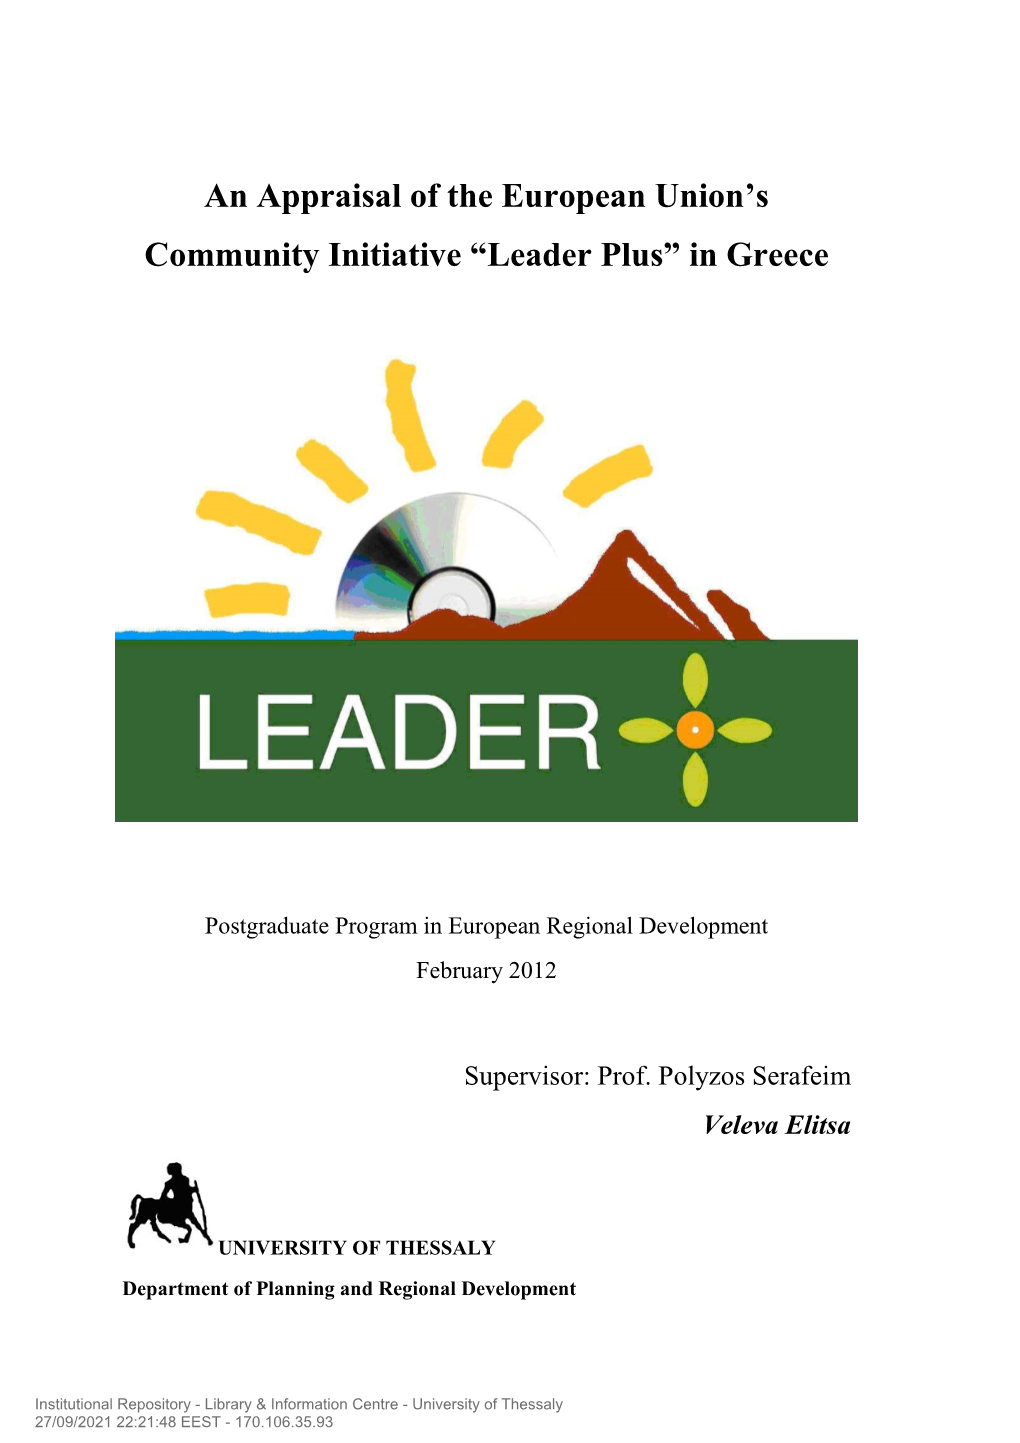 An Appraisal of the European Union's Community Initiative “Leader